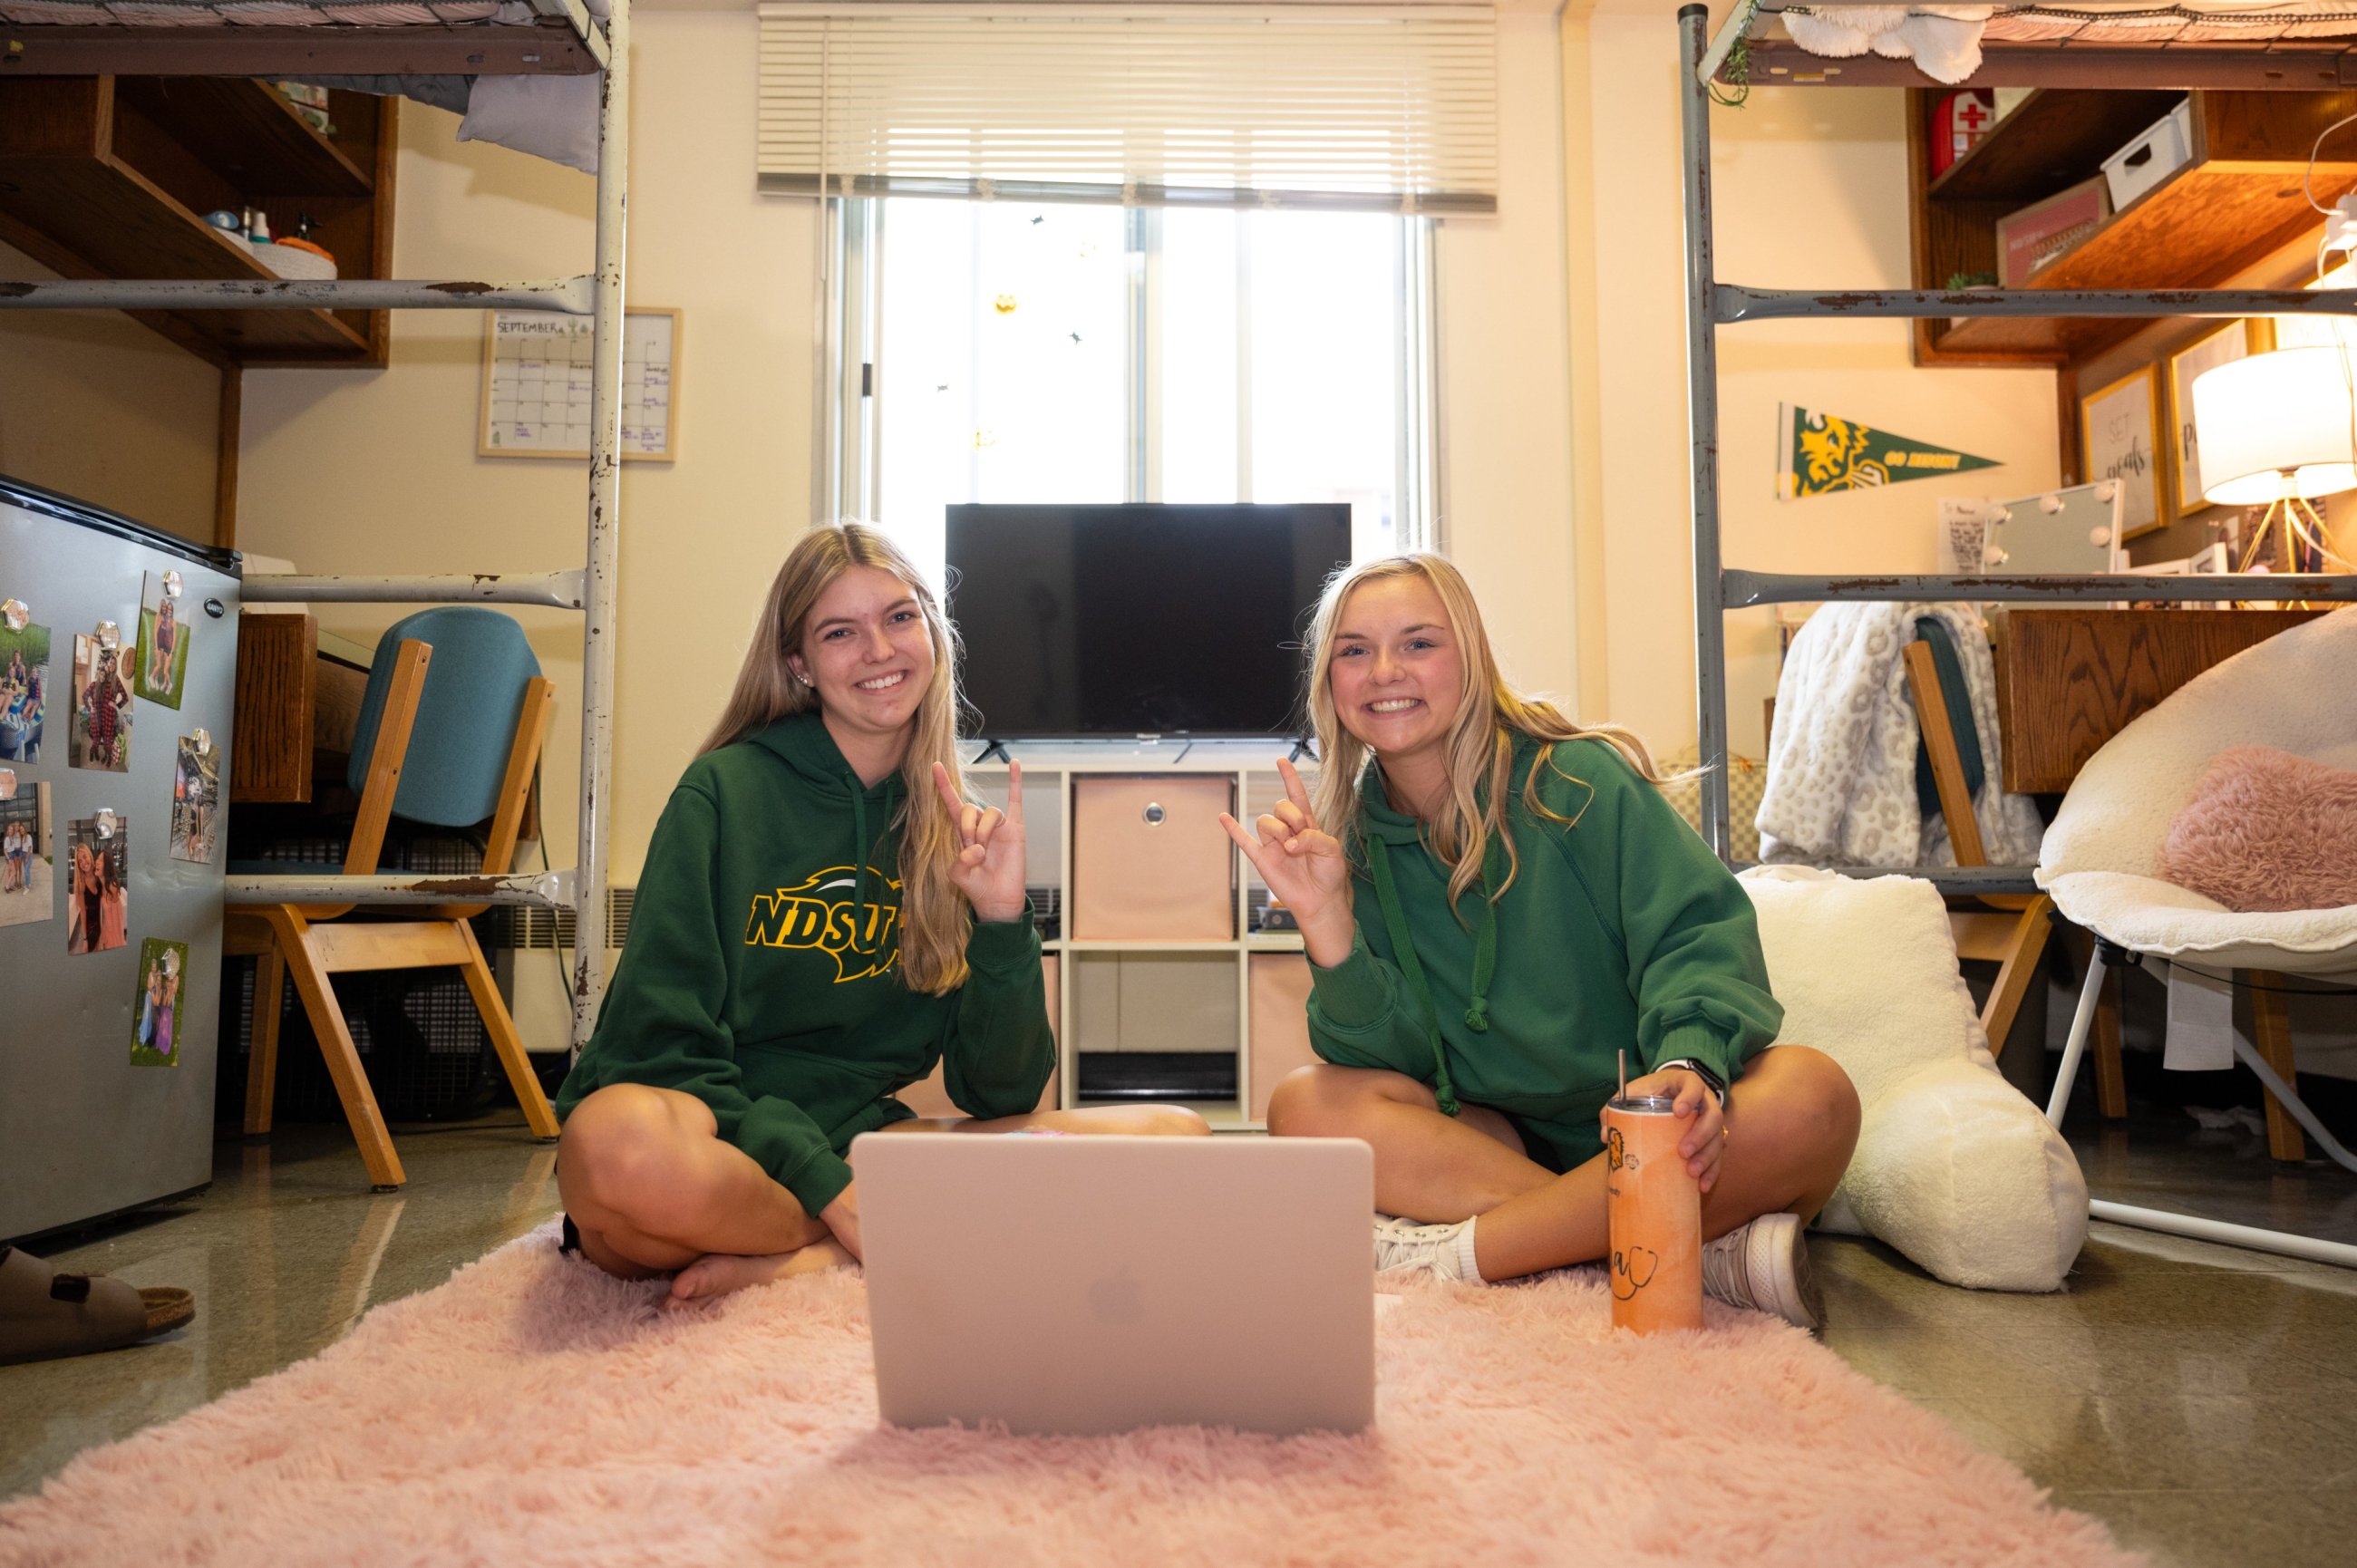 A photo of students in a residence hall room.